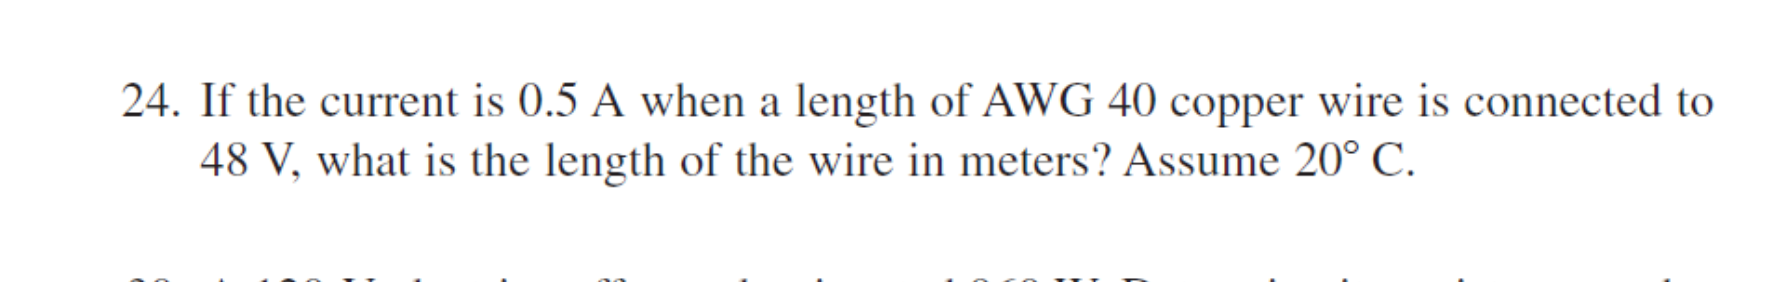 If the current is 0.5 A when a length of AWG 40 copper wire is connected to
48 V, what is the length of the wire in meters? Assume 20° C.
